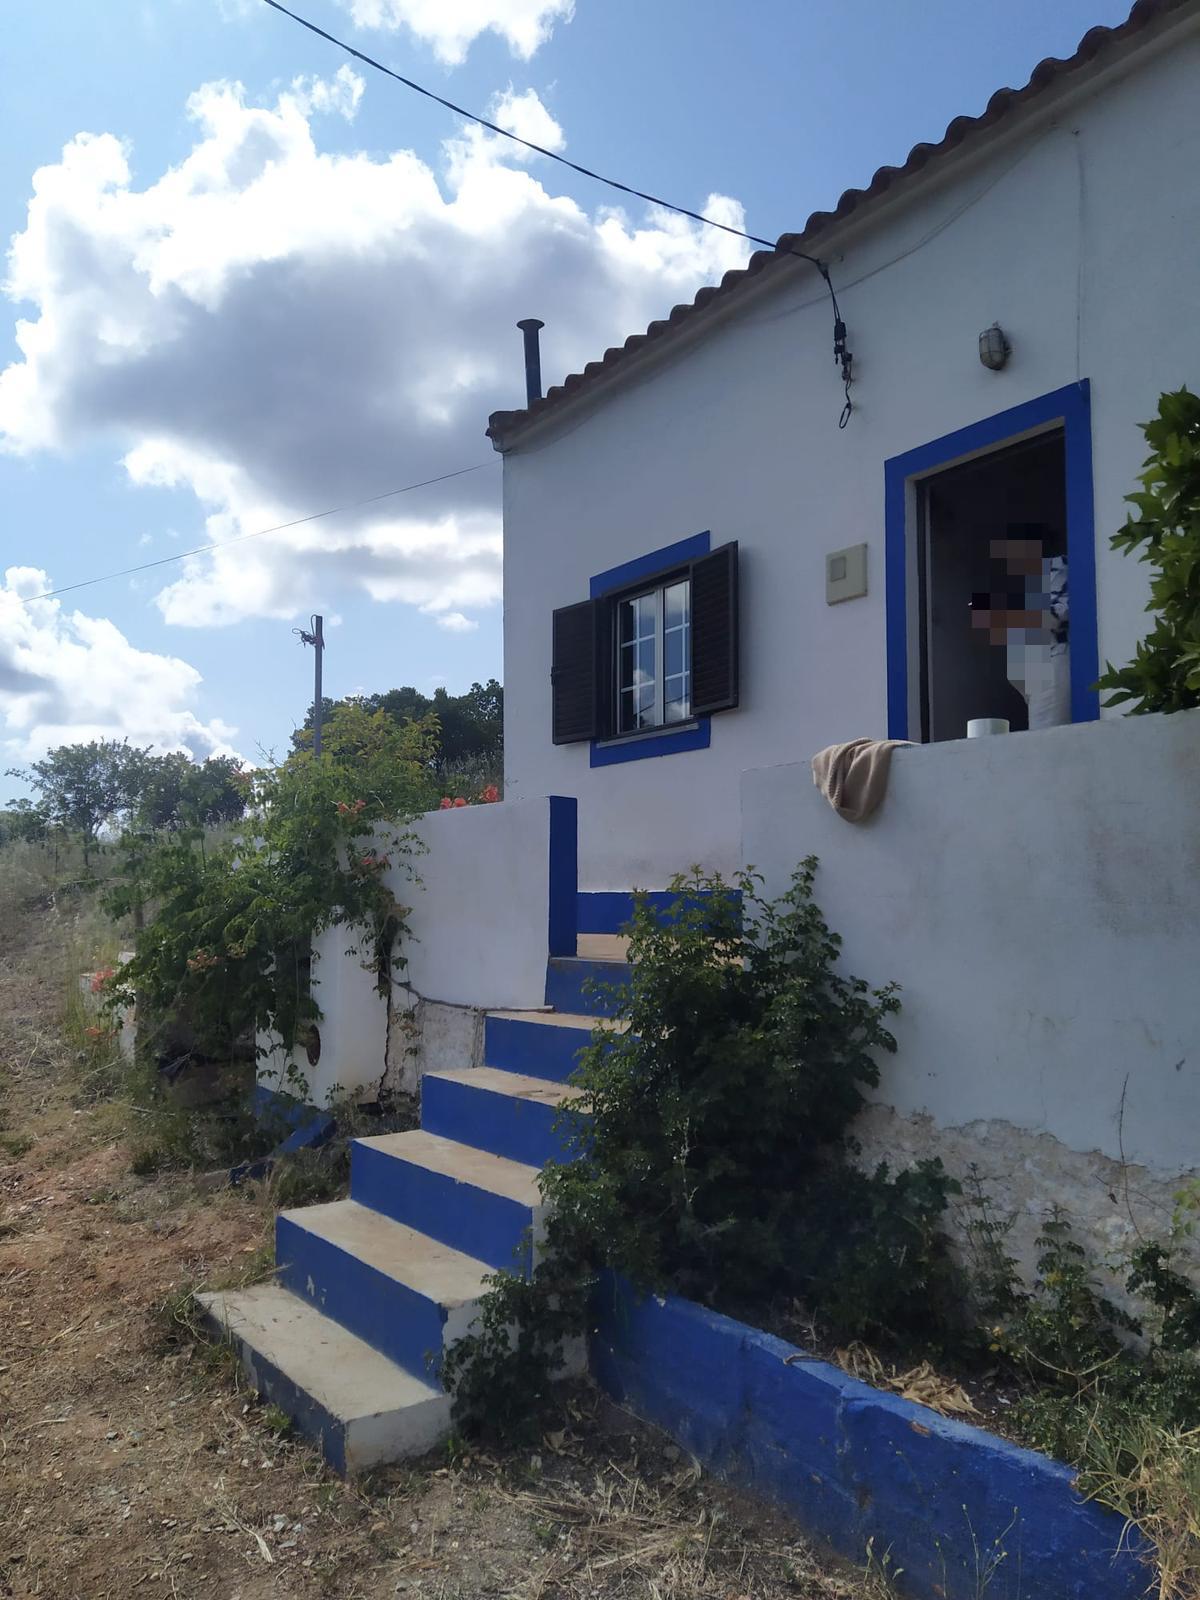 Property in Alentejo 20 minutes from the beach